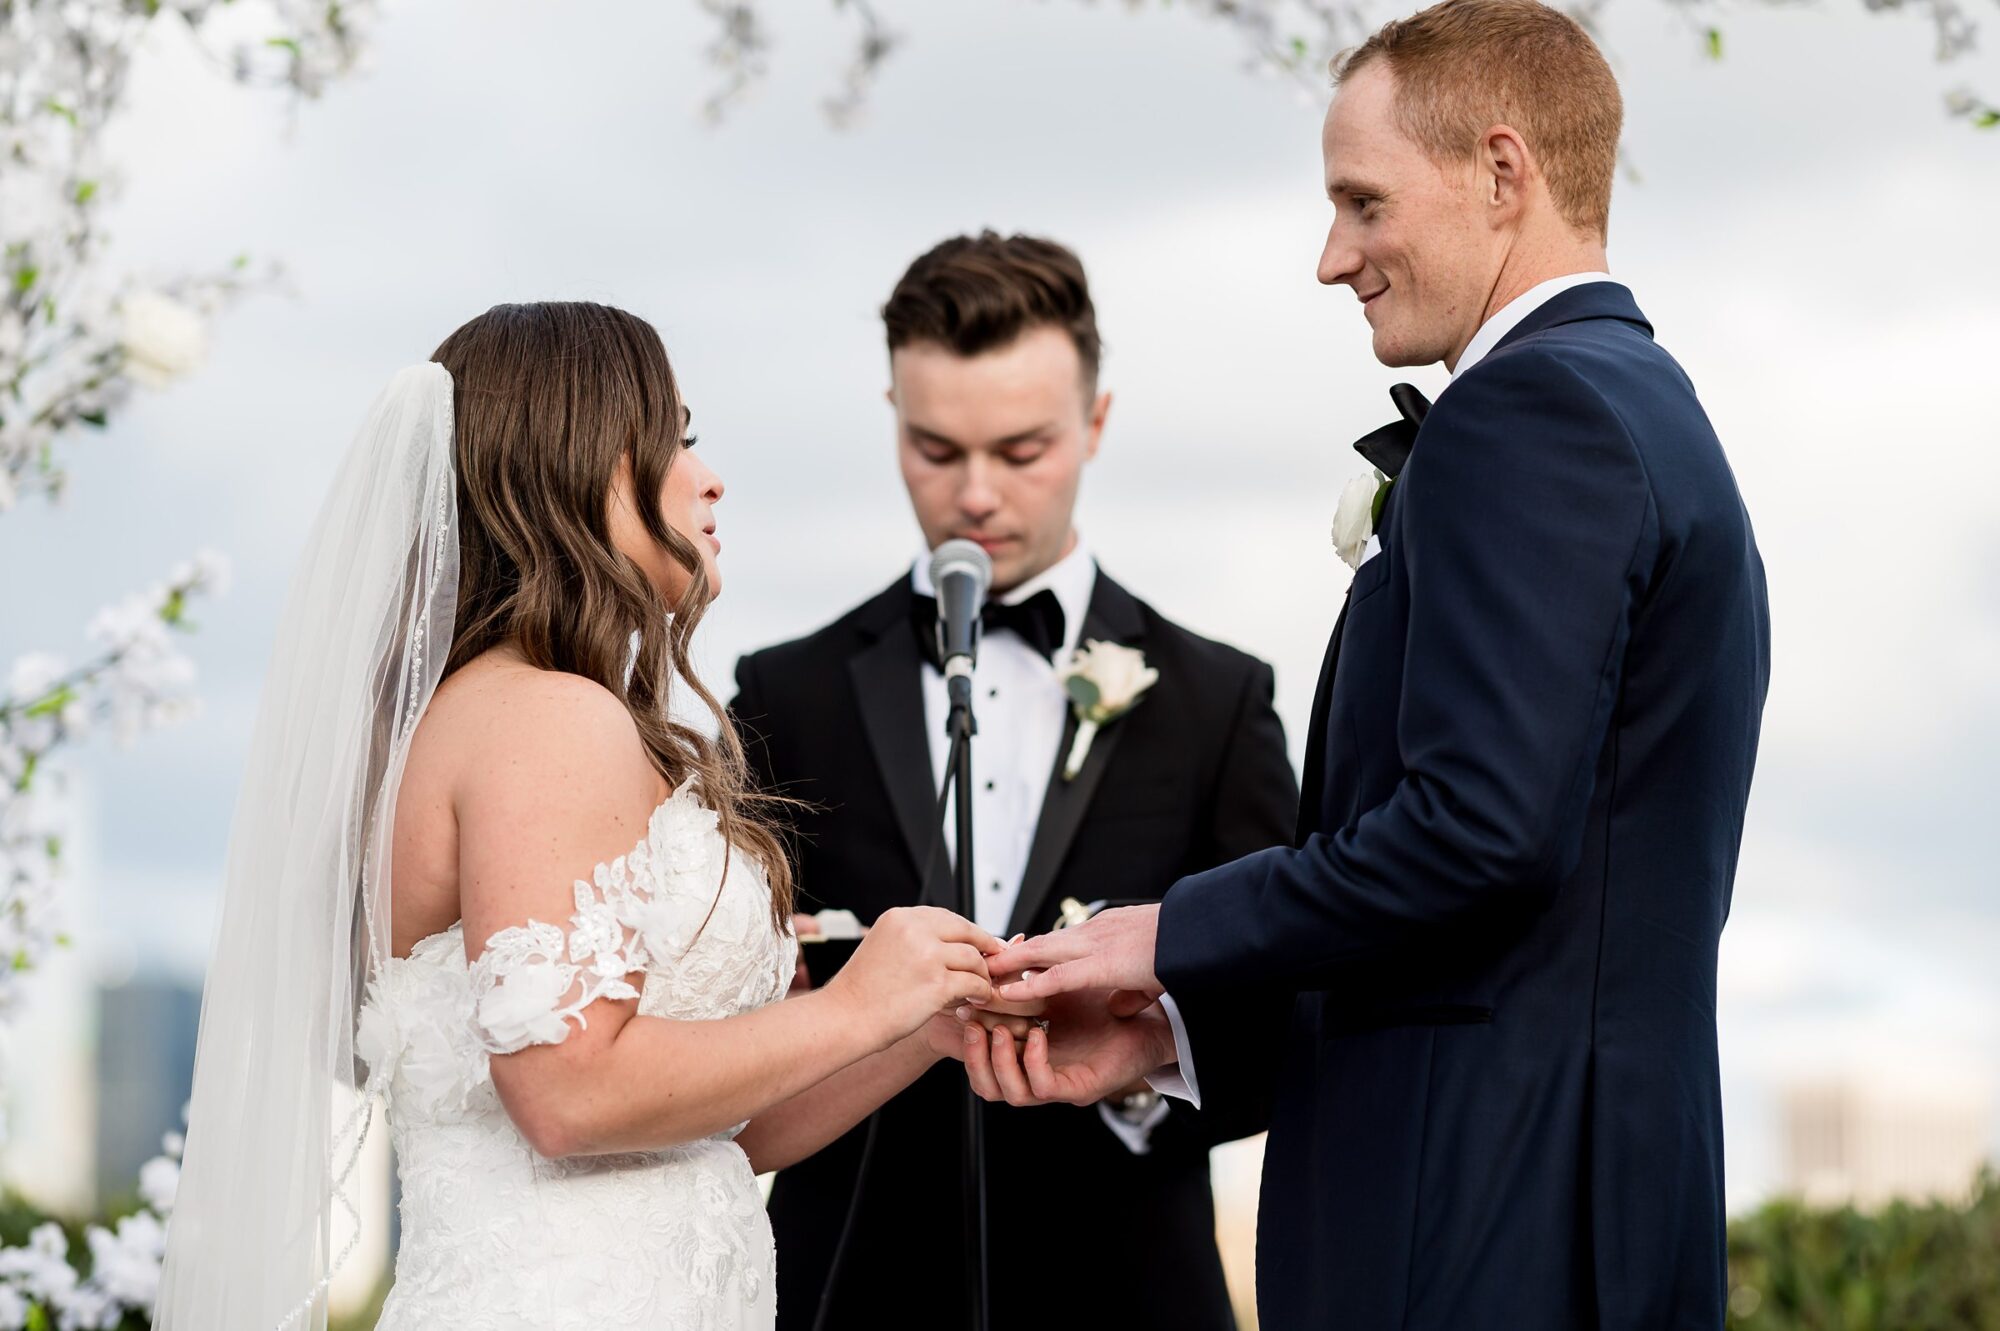 A bride and groom exchange their wedding rings at an outdoor wedding ceremony.